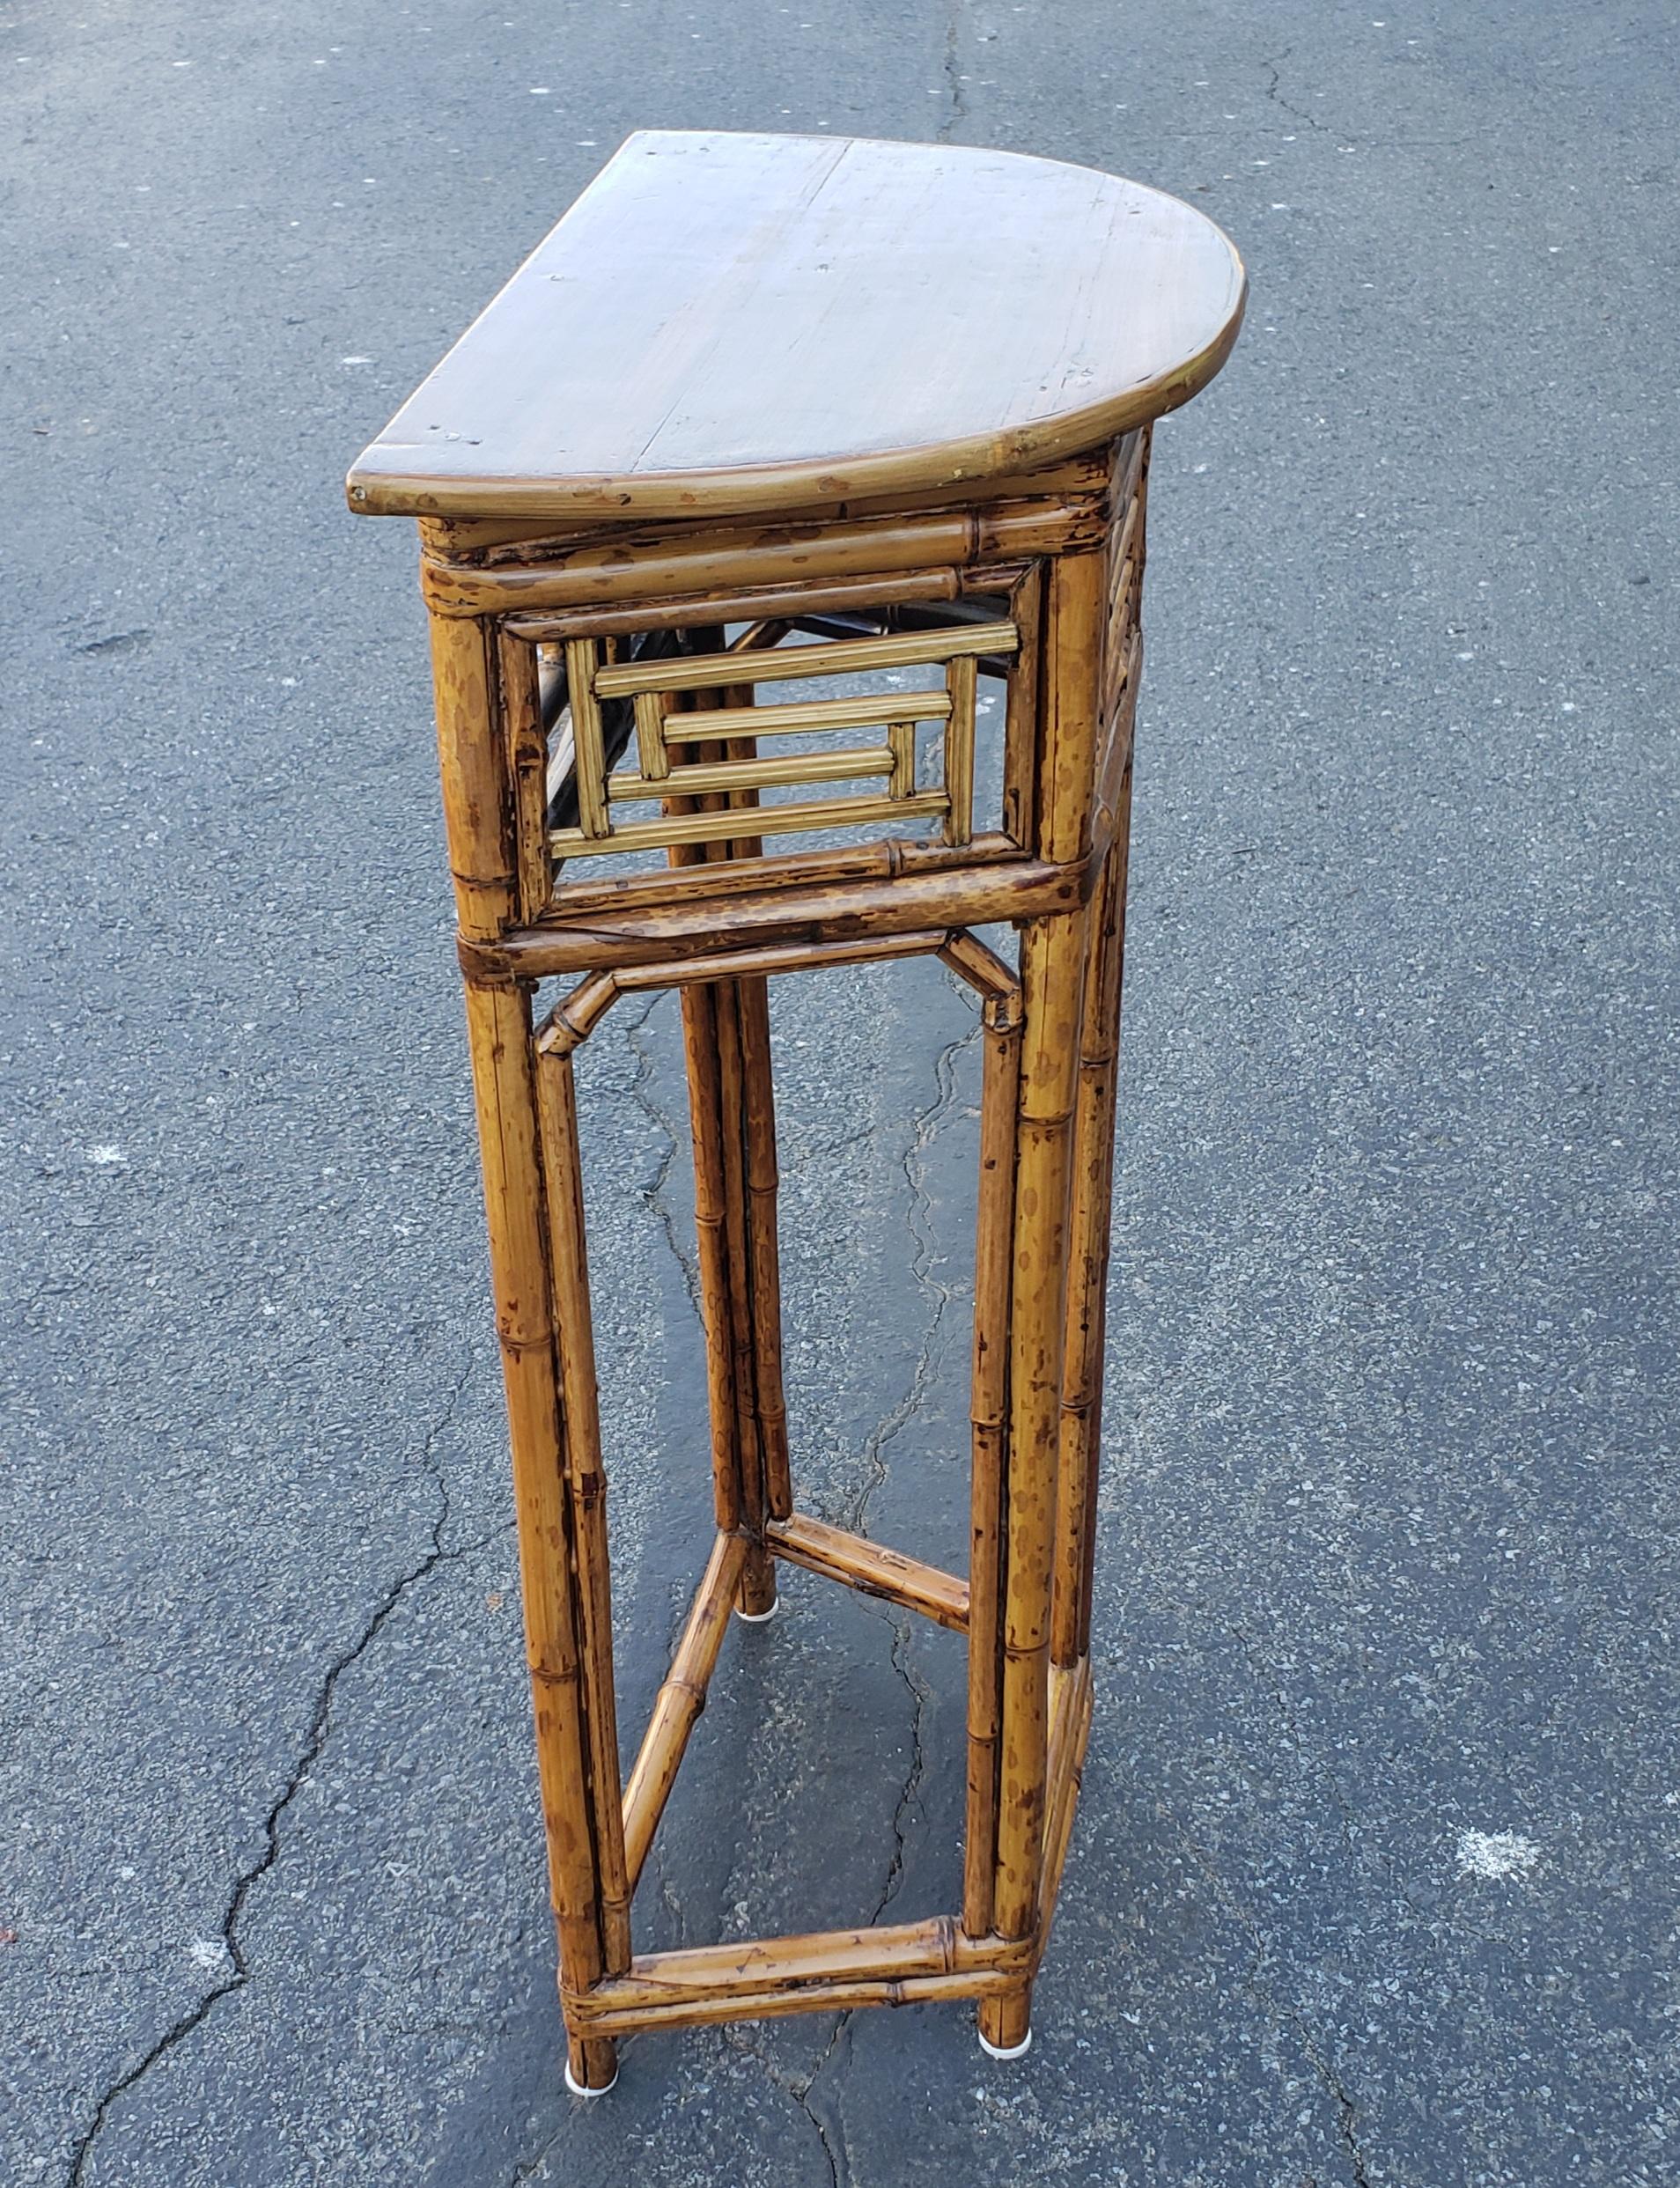 20th Century Pair of Midcentury Asian Bamboo and Wood Demilune Side Tables or Plant Stands